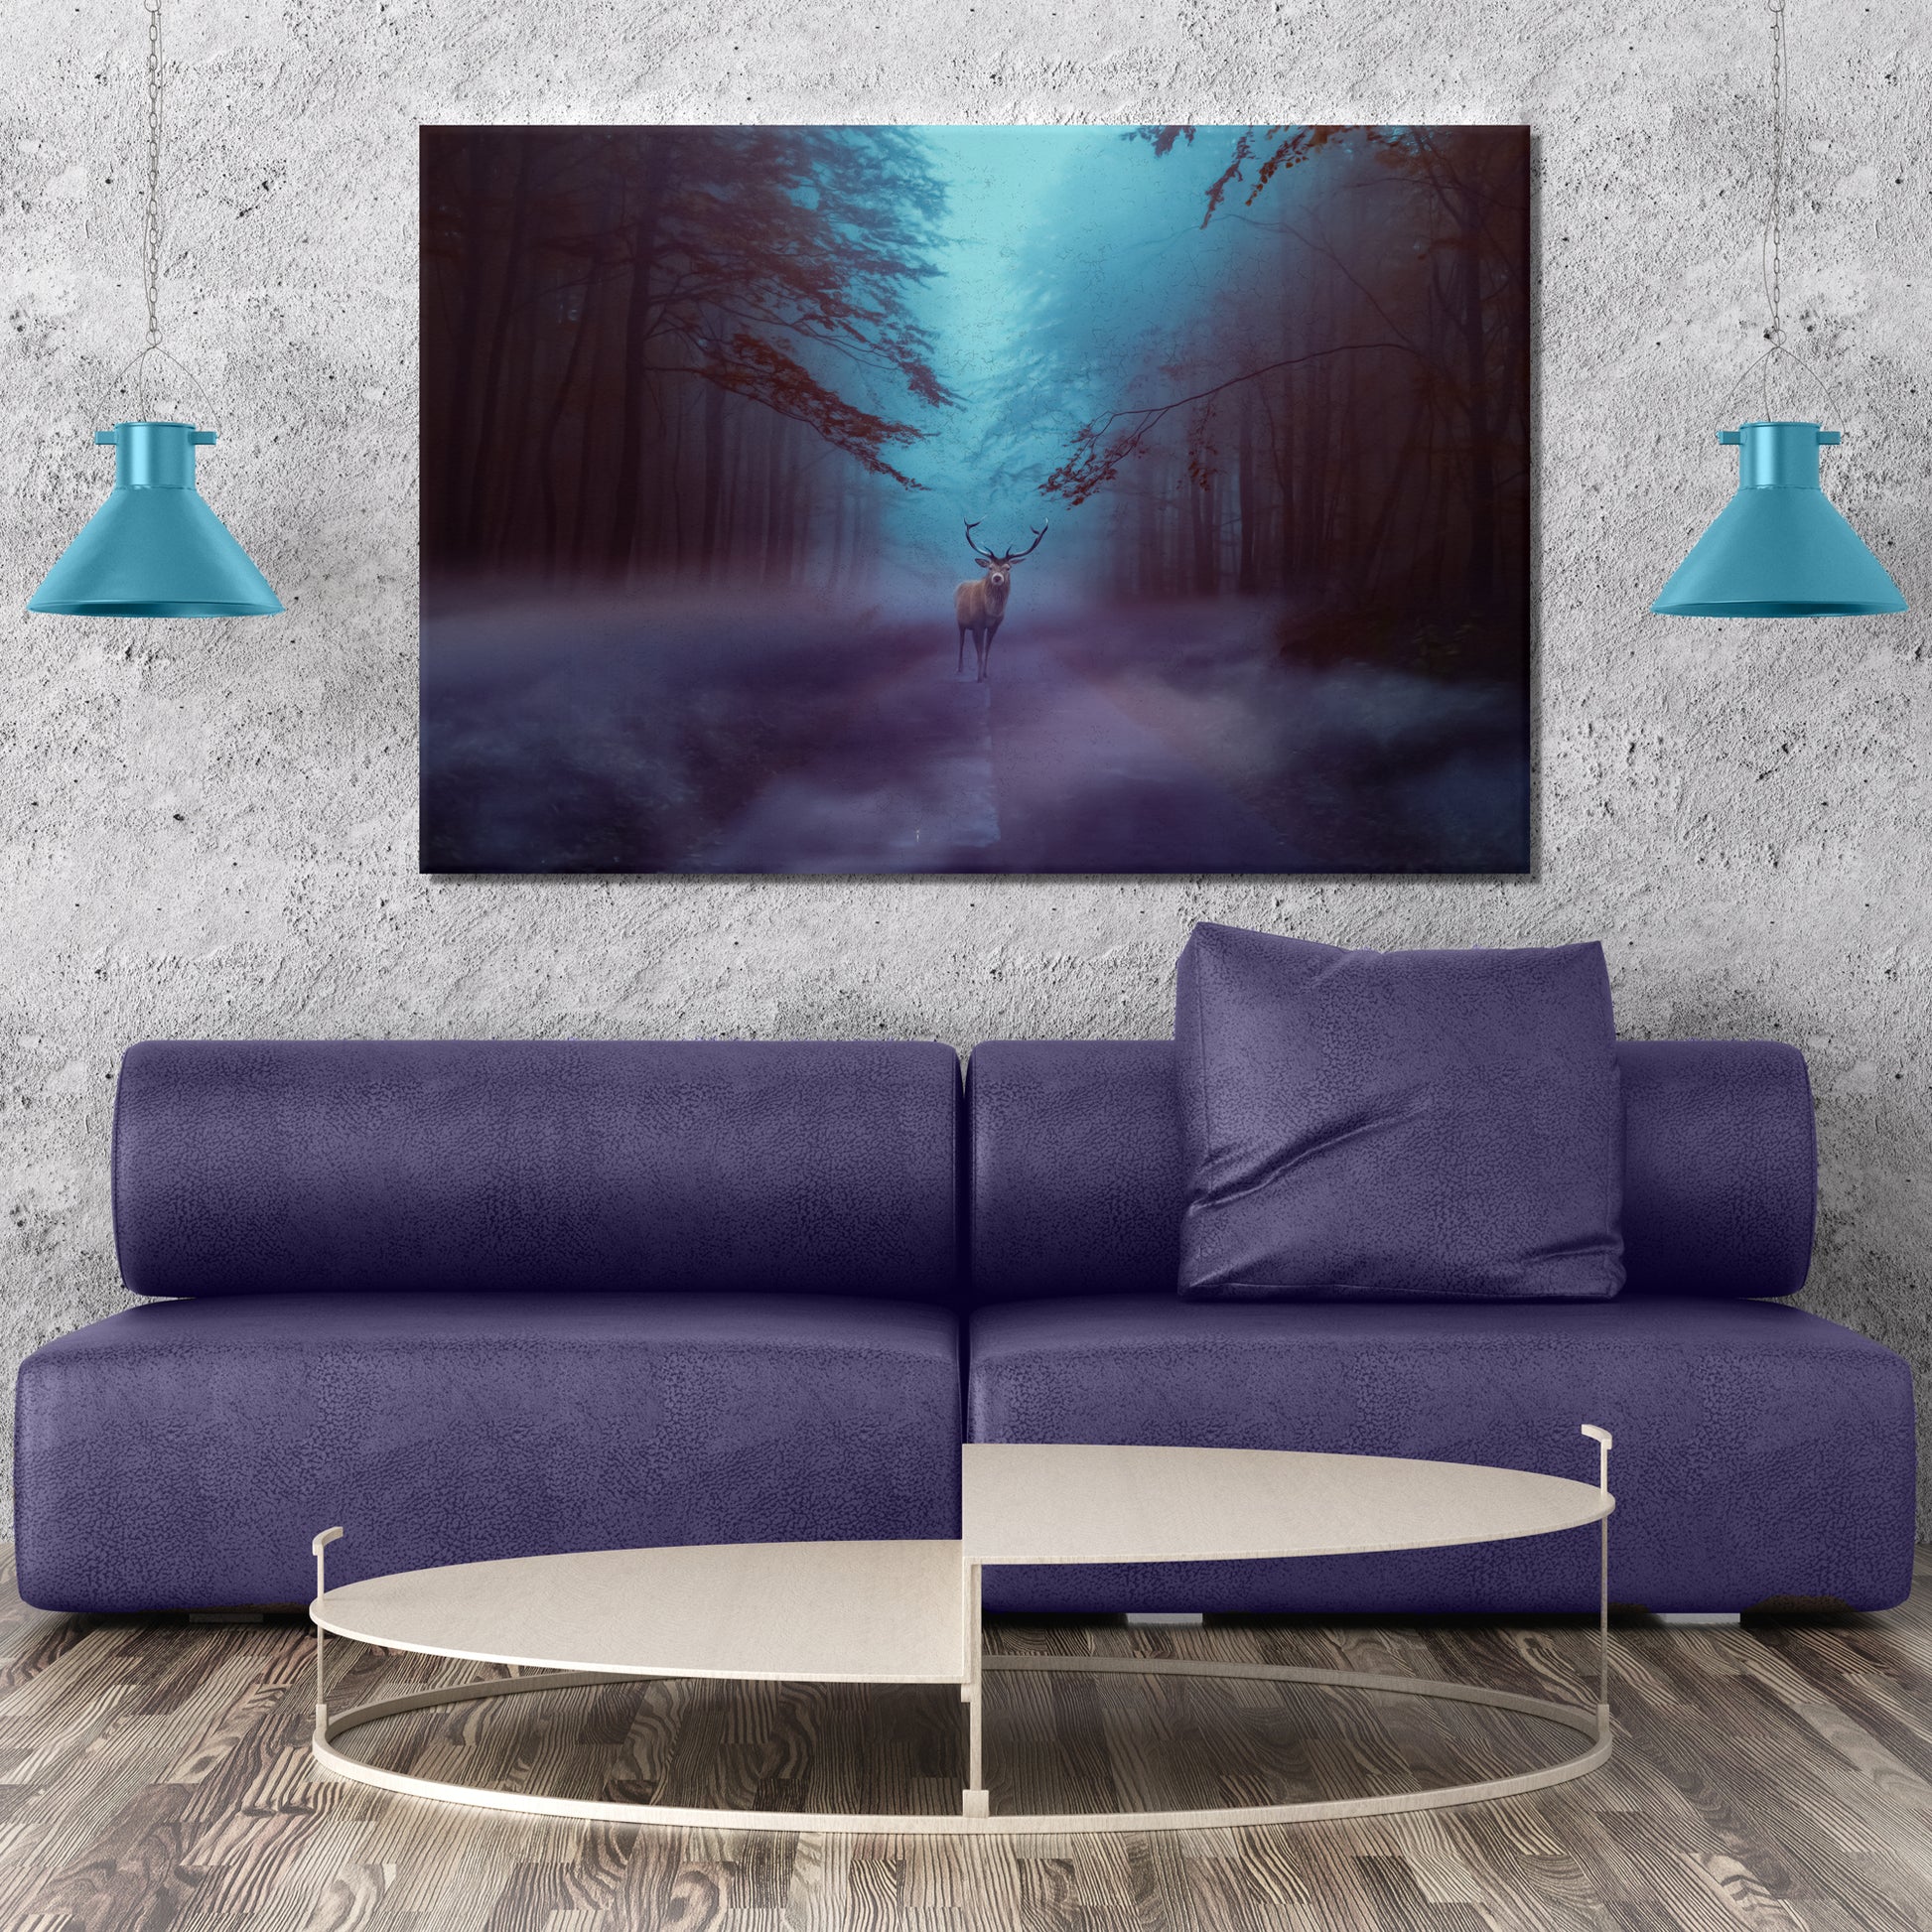 Deer In The Midst Of Foggy Forest Canvas Wall Art Style 2 - Image by Tailored Canvases